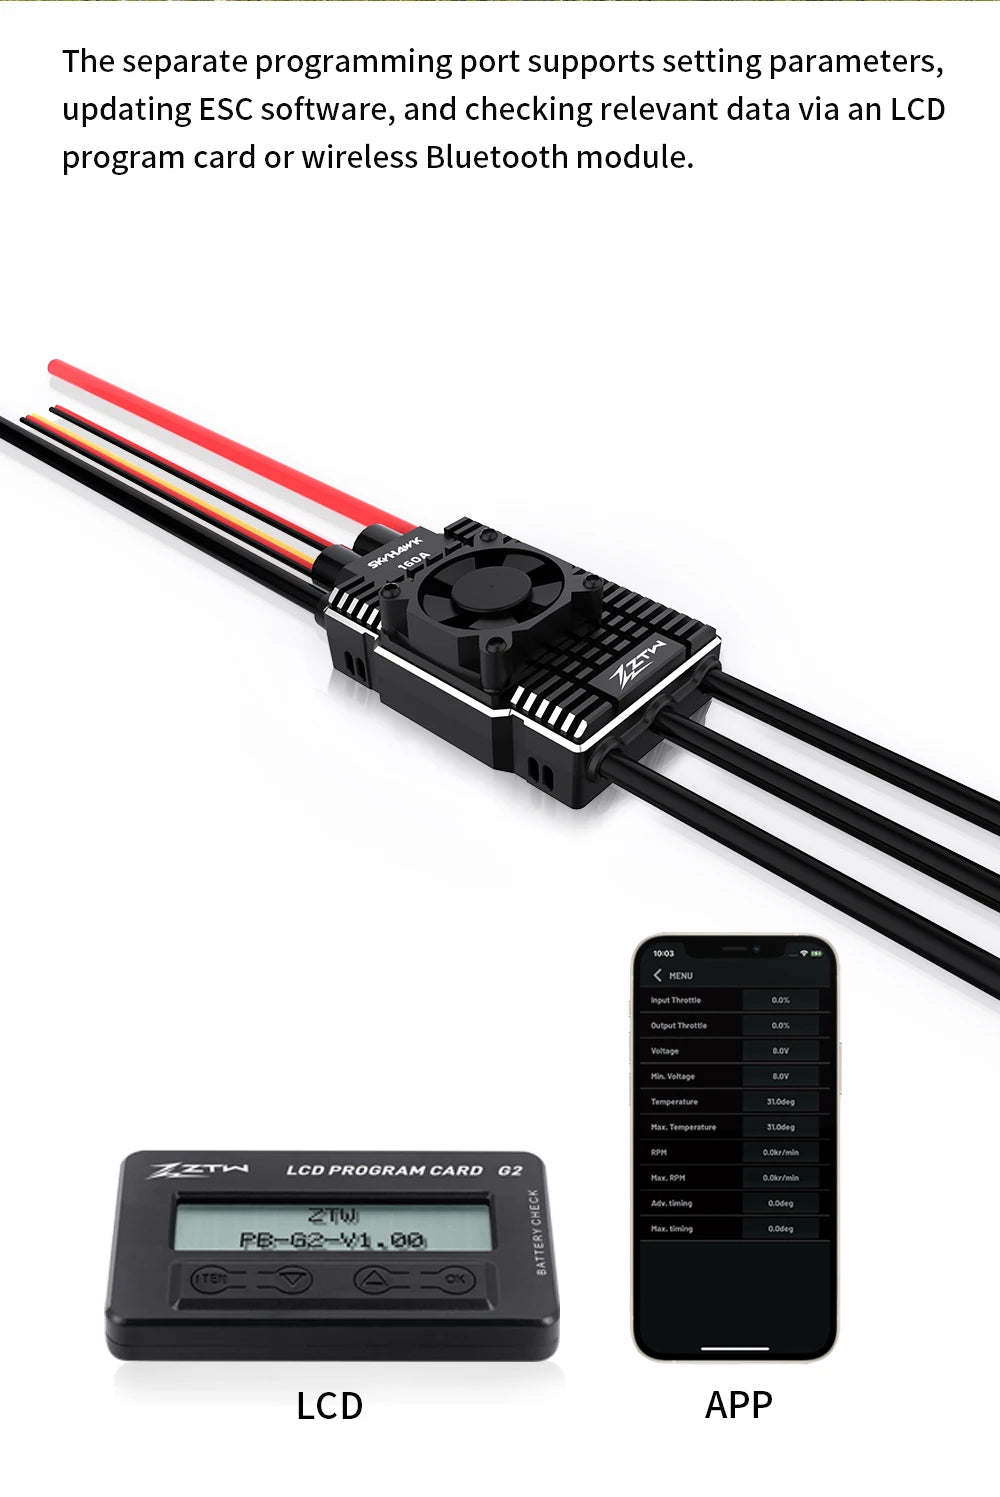 ZTW 32-Bit Skyhawk 130A/160A Telemetry ESC, the separate programming port supports setting parameters, updating ESC software; and checking relevant data via an